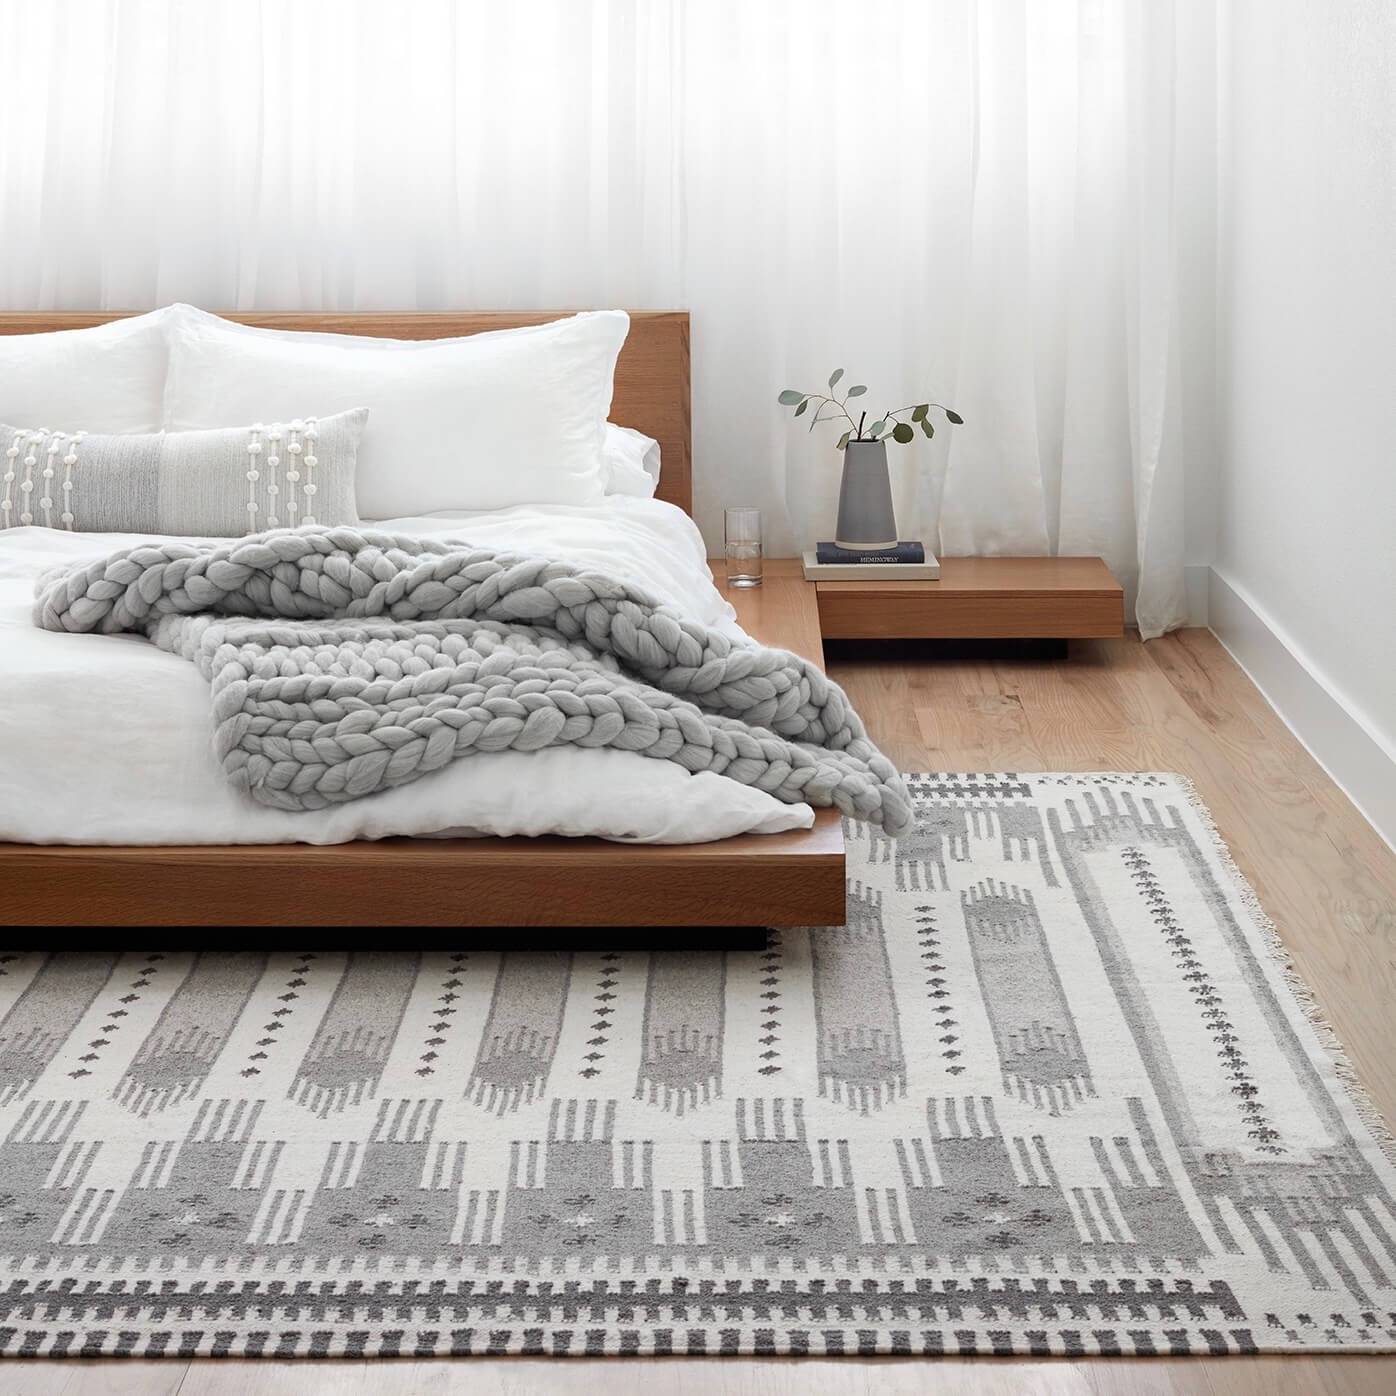 The Citizenry Asha Handwoven Area Rug | 10' x 14' | Grey - Image 2